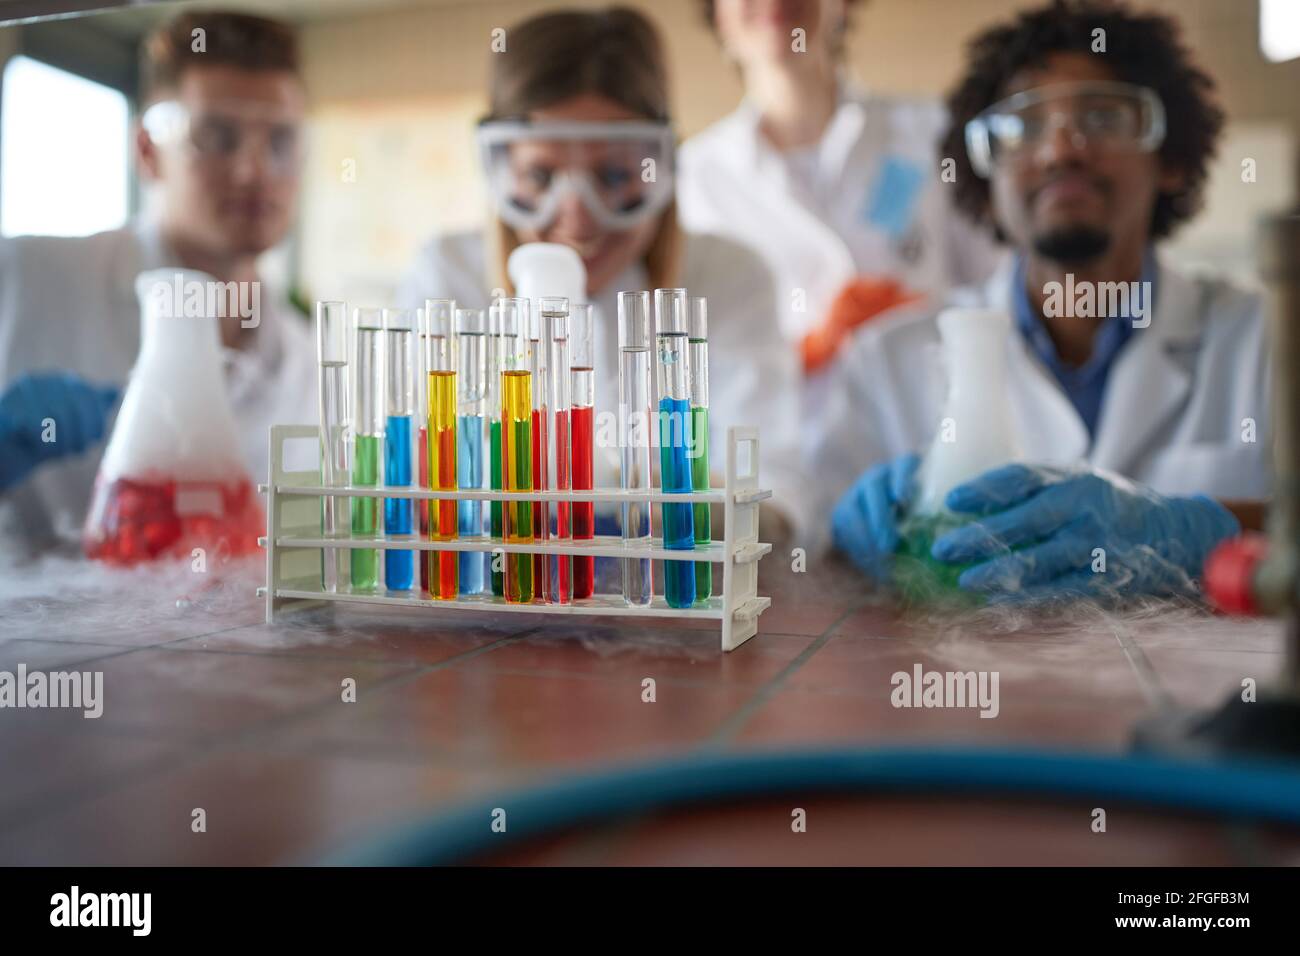 Young chemistry students in a sterile laboratory environment are enjoying observing colorful chemical reactions. Science, chemistry, lab, people Stock Photo